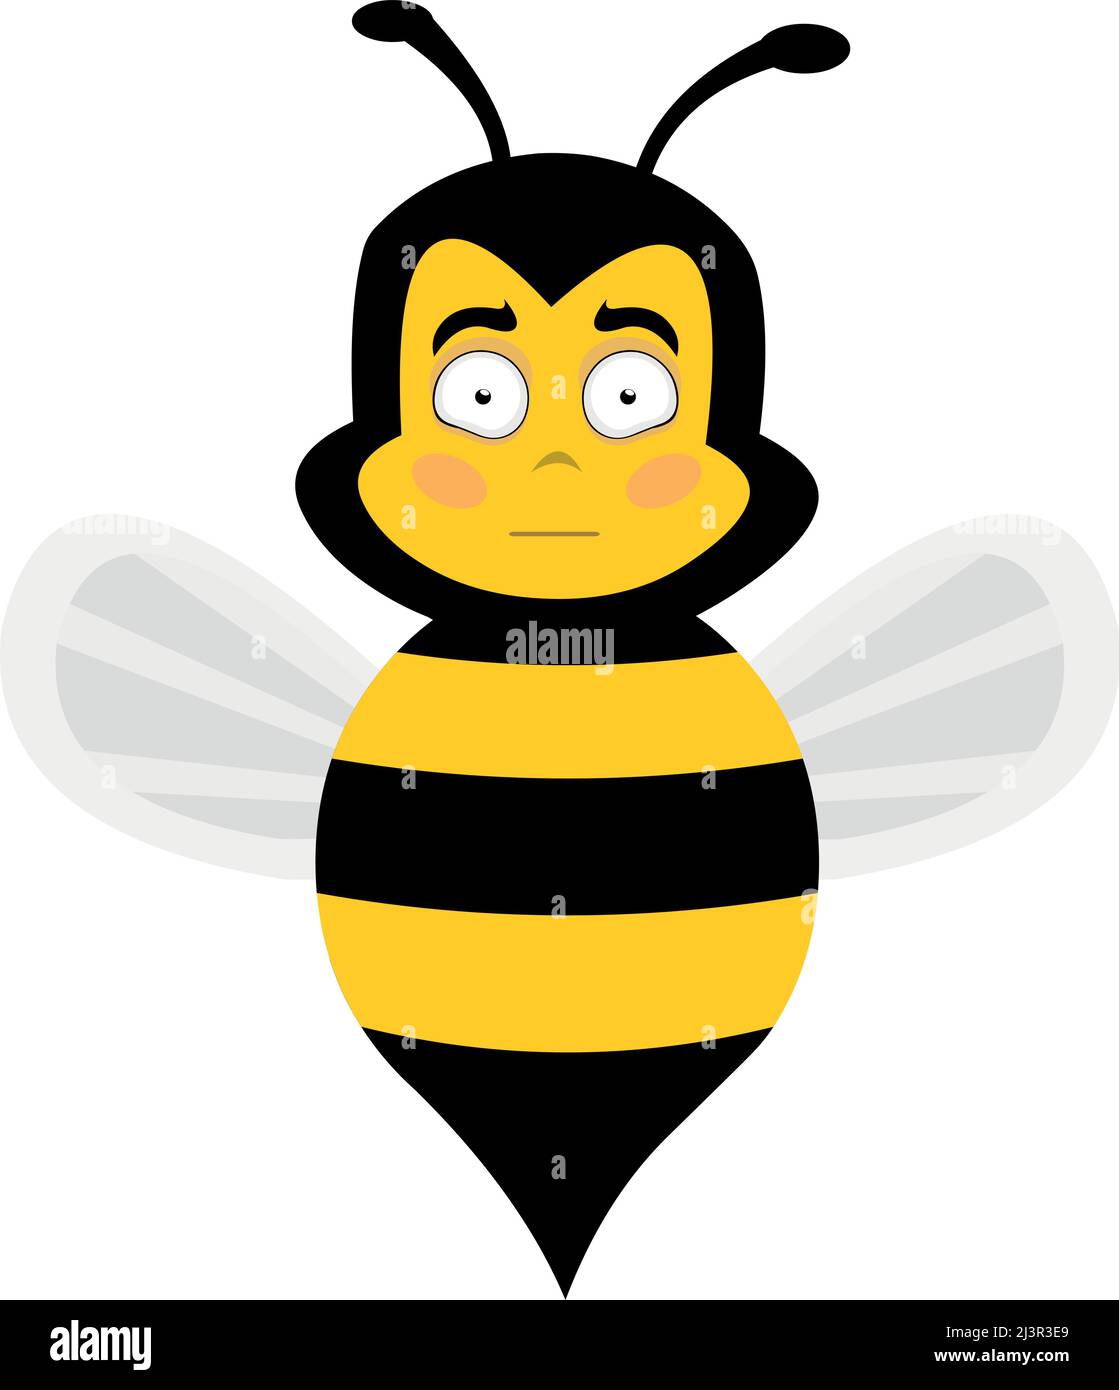 Vector character illustration of a cartoon bee with an embarrassed and blushing expression Stock Vector